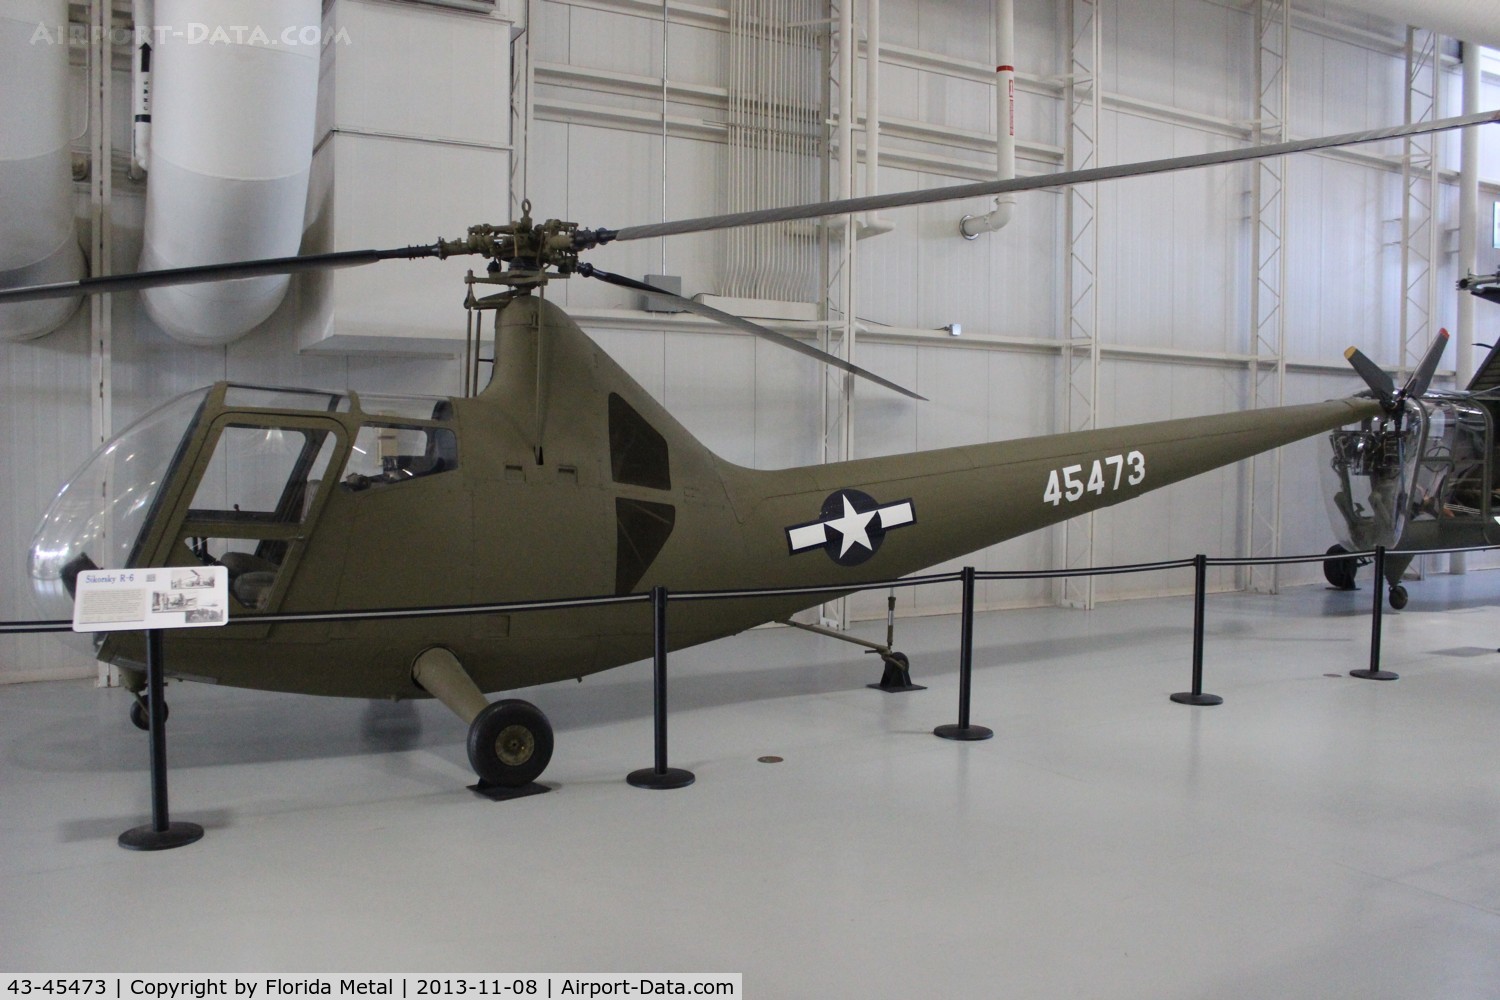 43-45473, 1944 Sikorsky R-6A Hoverfly C/N Not found 43-45473, R-6A Hoverfly at Ft. Rucker Army Aviation Museum